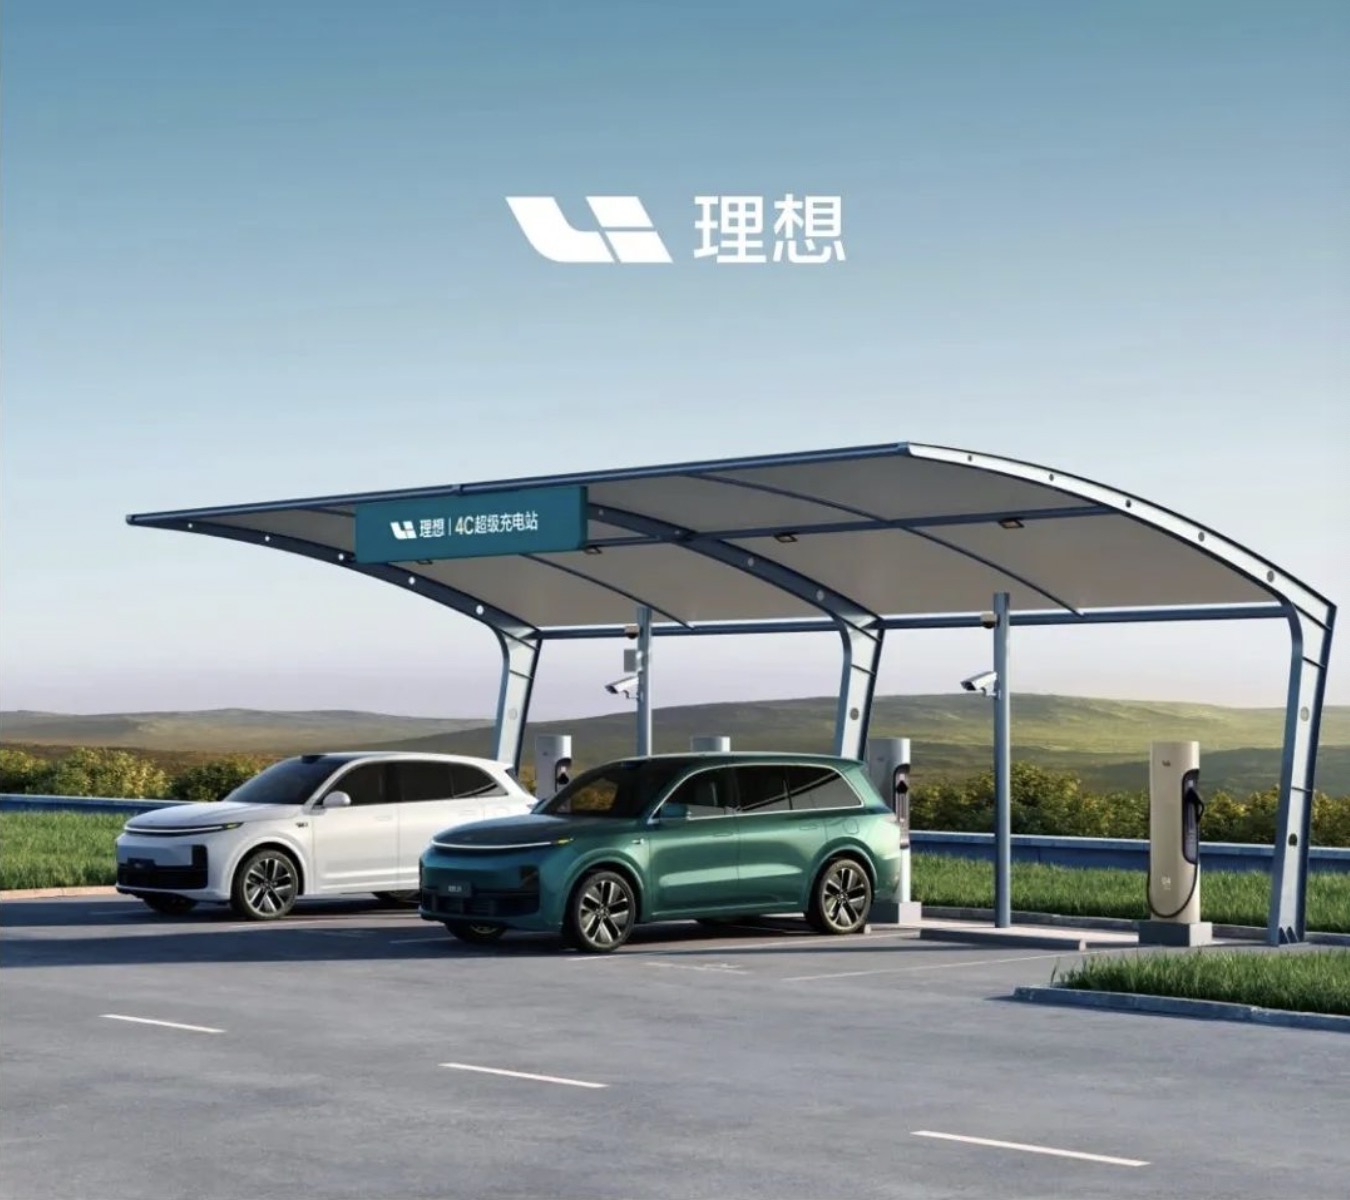 Ideal Unveils 4C Super Charging Station with 480 kW Power for Electric Vehicles - 30 Minute Charging Time.